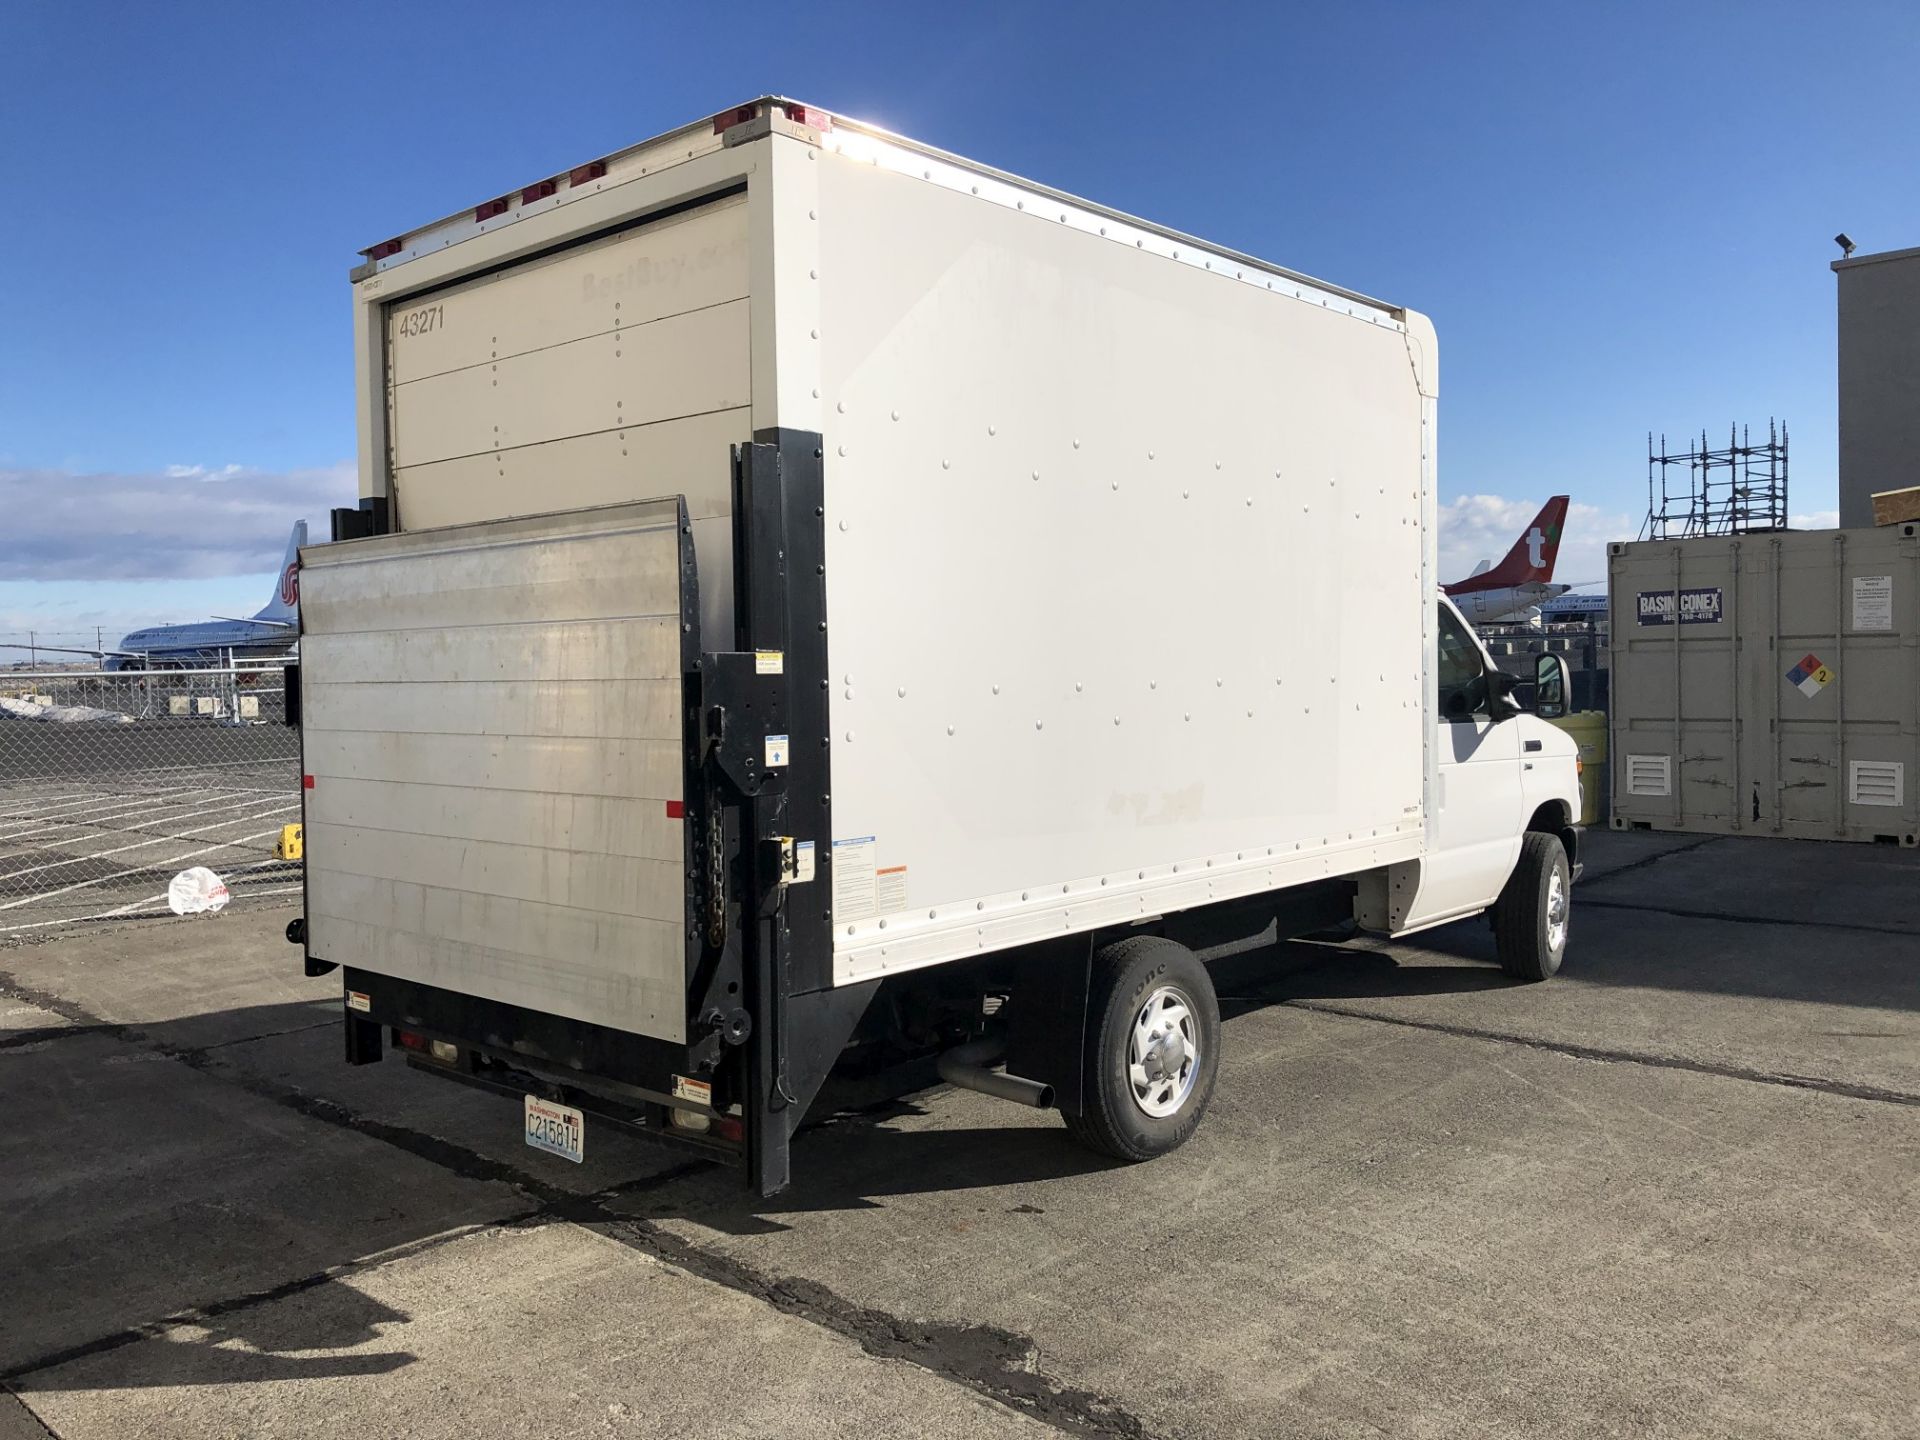 Late Delivery 4/9 - 2012 Ford E350 Super Duty 12' Box Truck w/ Lift Gate - Image 5 of 13